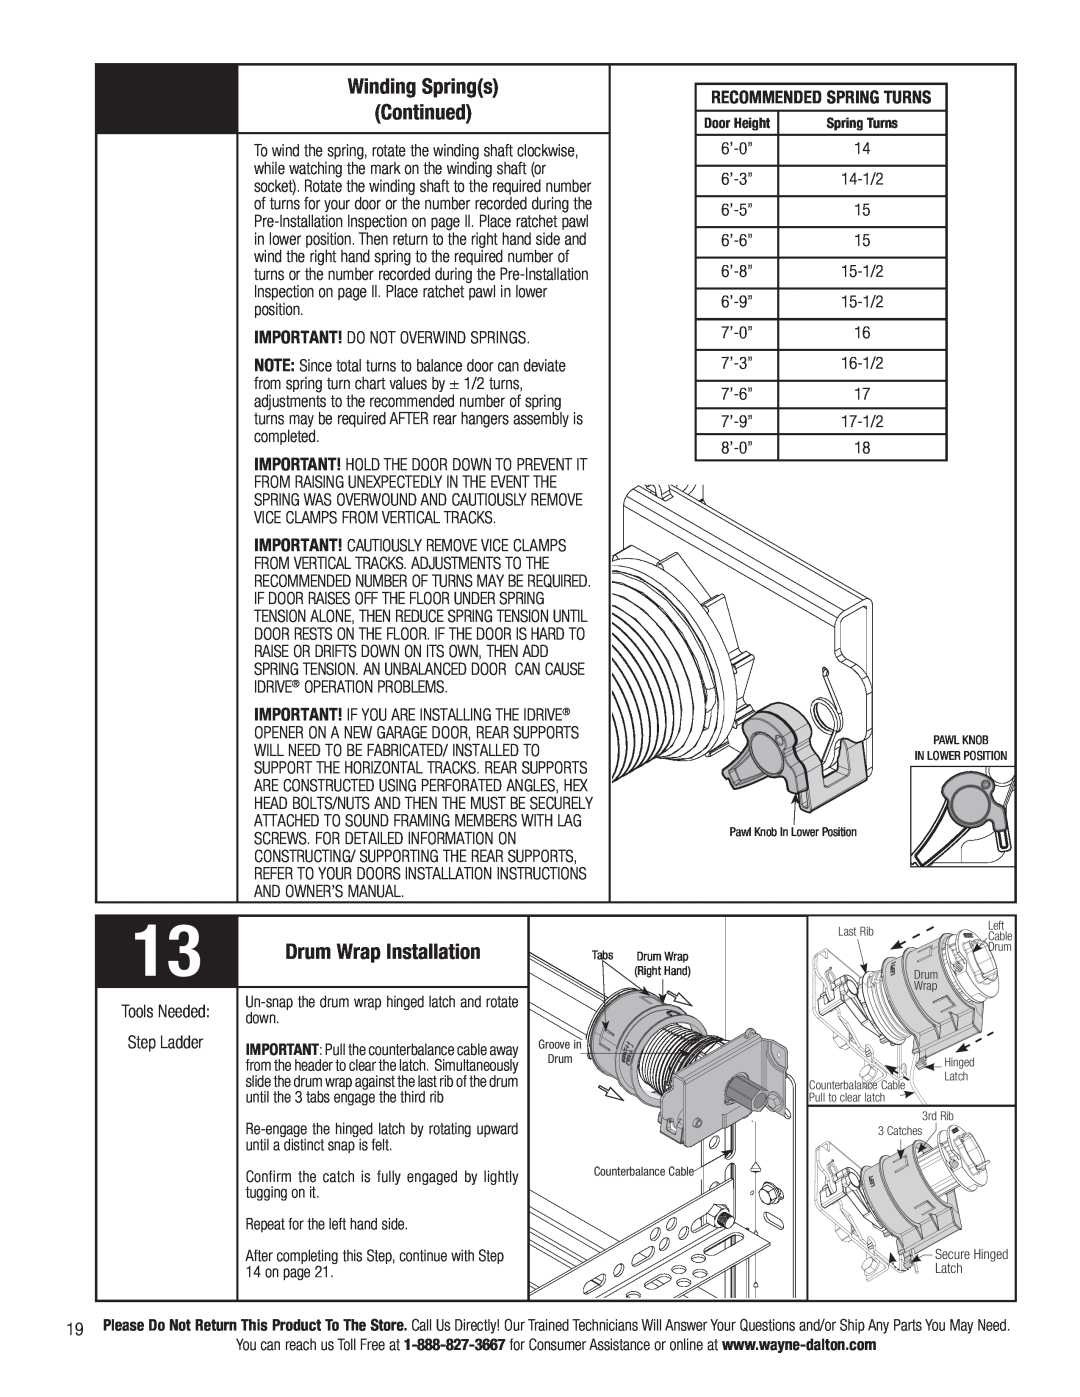 Wayne-Dalton 3663-372 Winding Springs Continued, Drum Wrap Installation, Un-snapthe drum wrap hinged latch and rotate down 